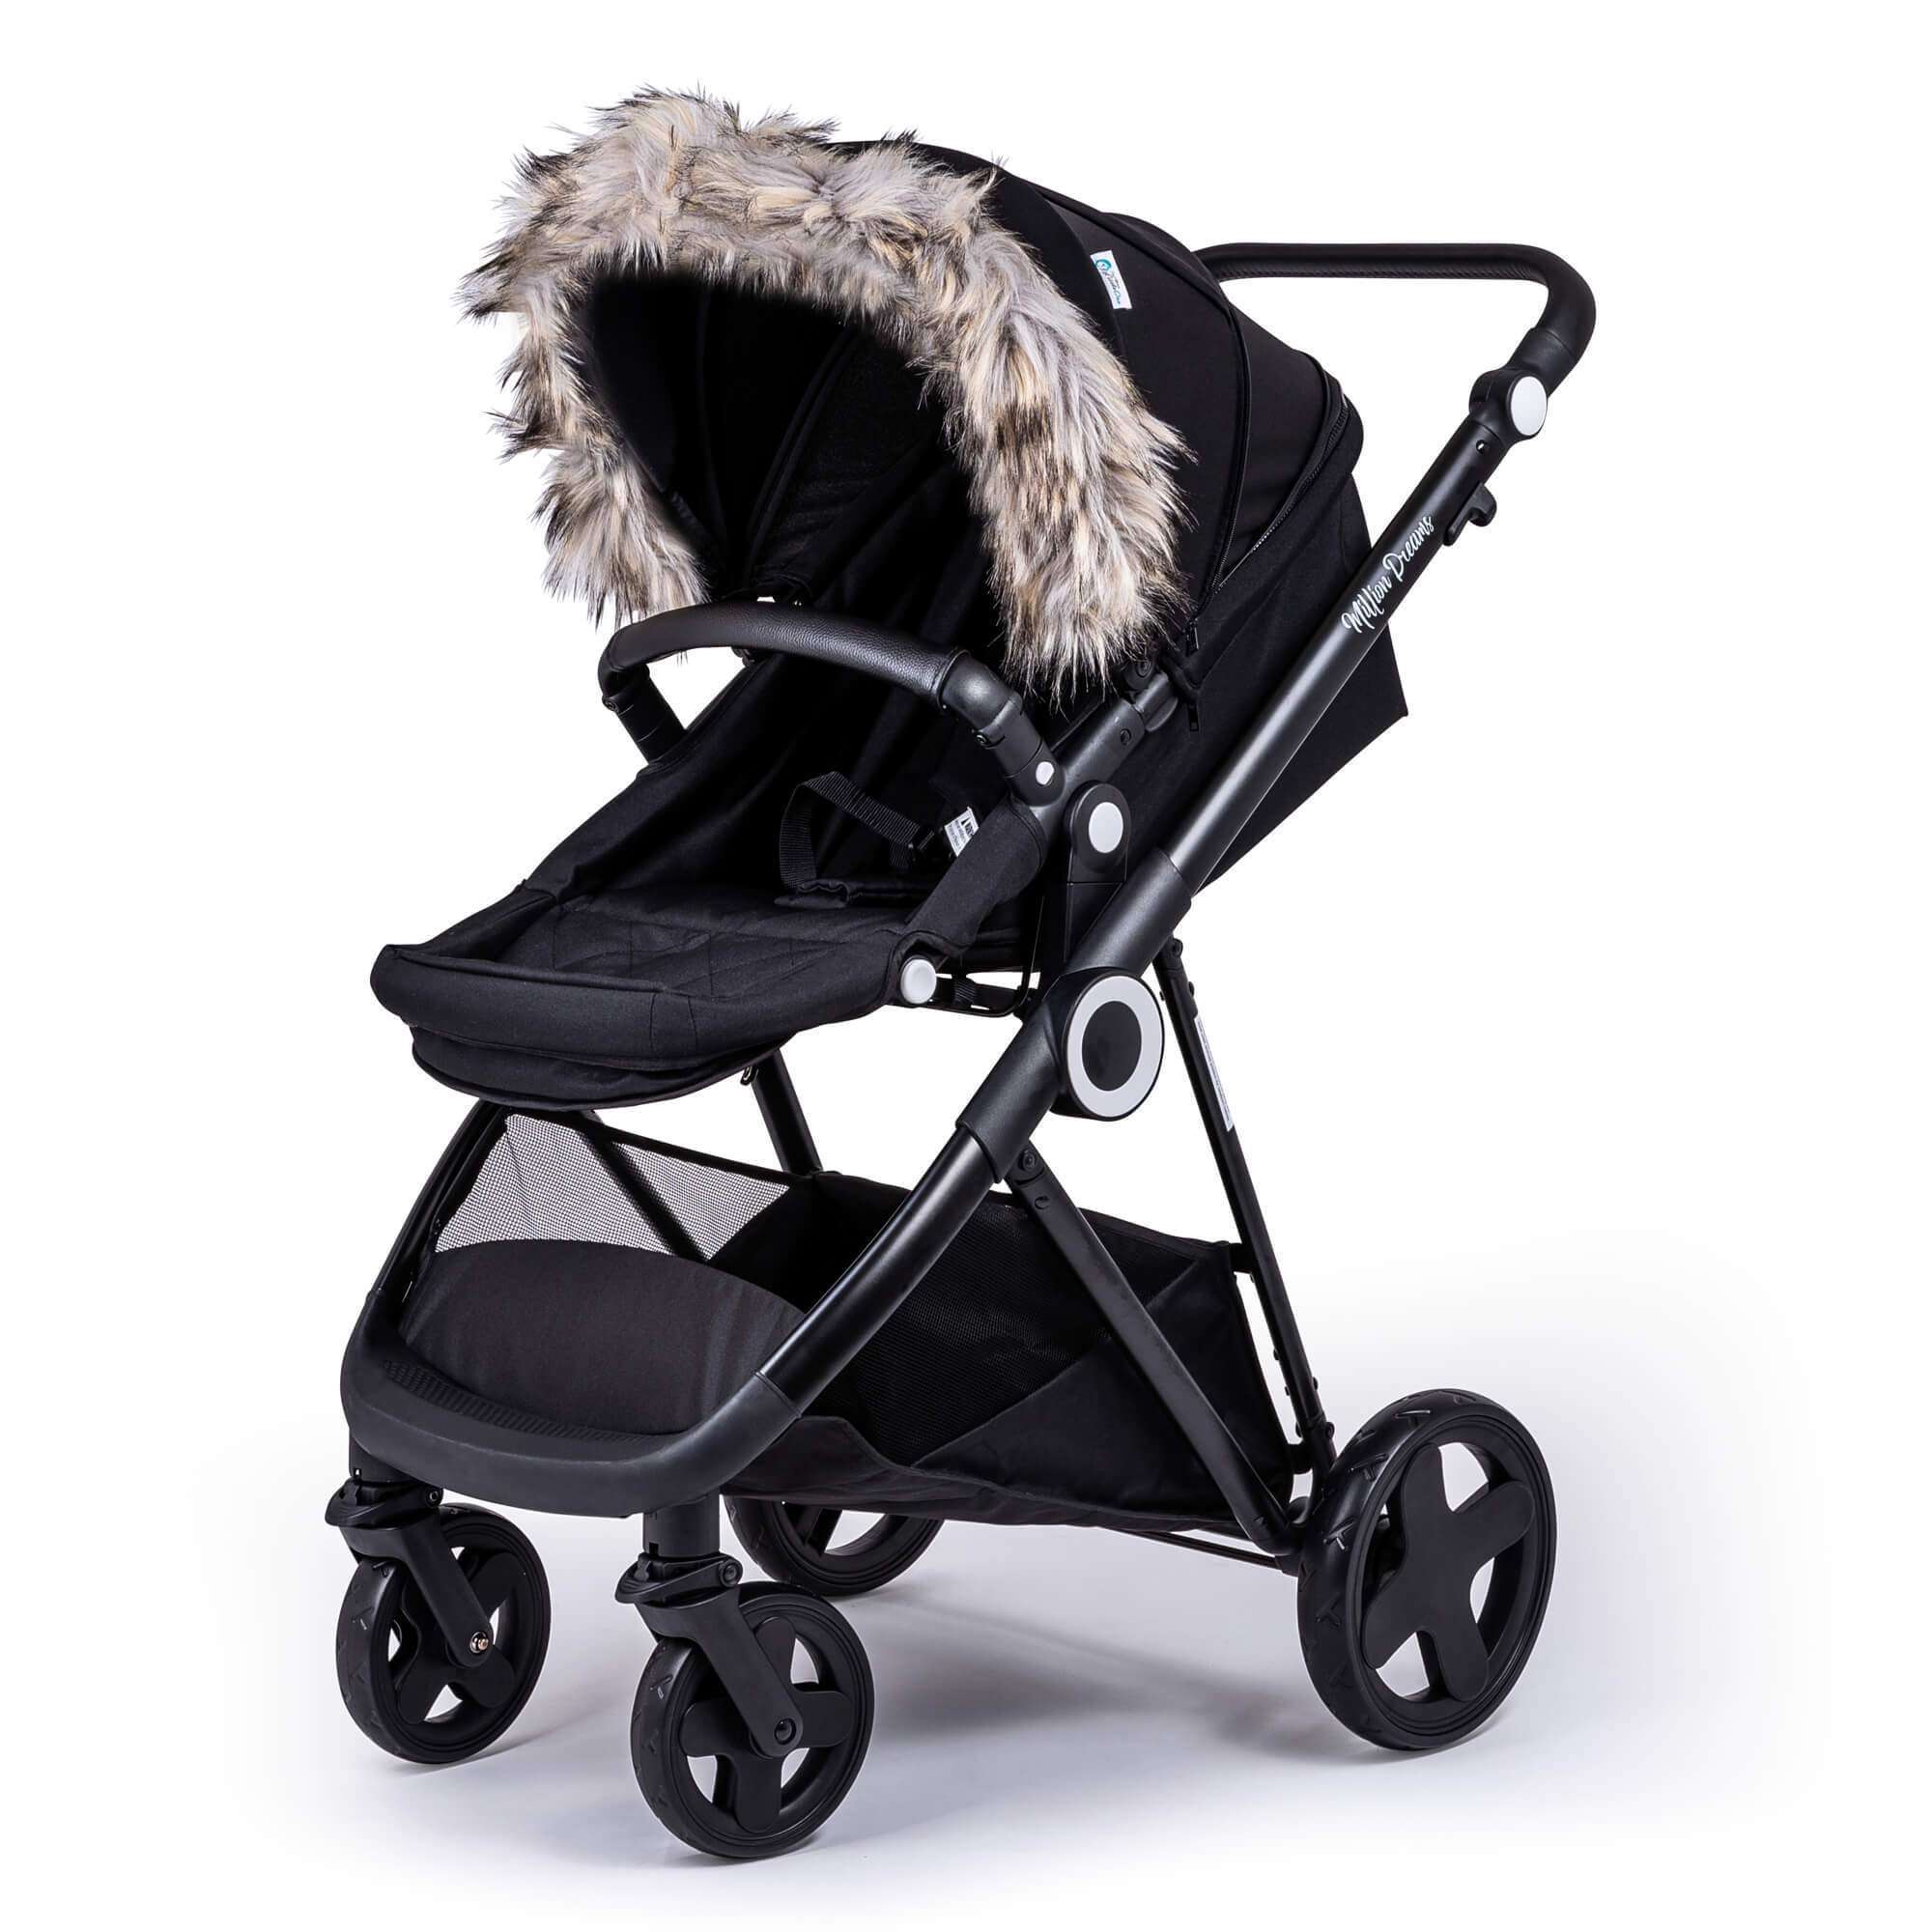 Pram Fur Hood Trim Attachment for Pushchair Compatible with Maxi Cosi - For Your Little One